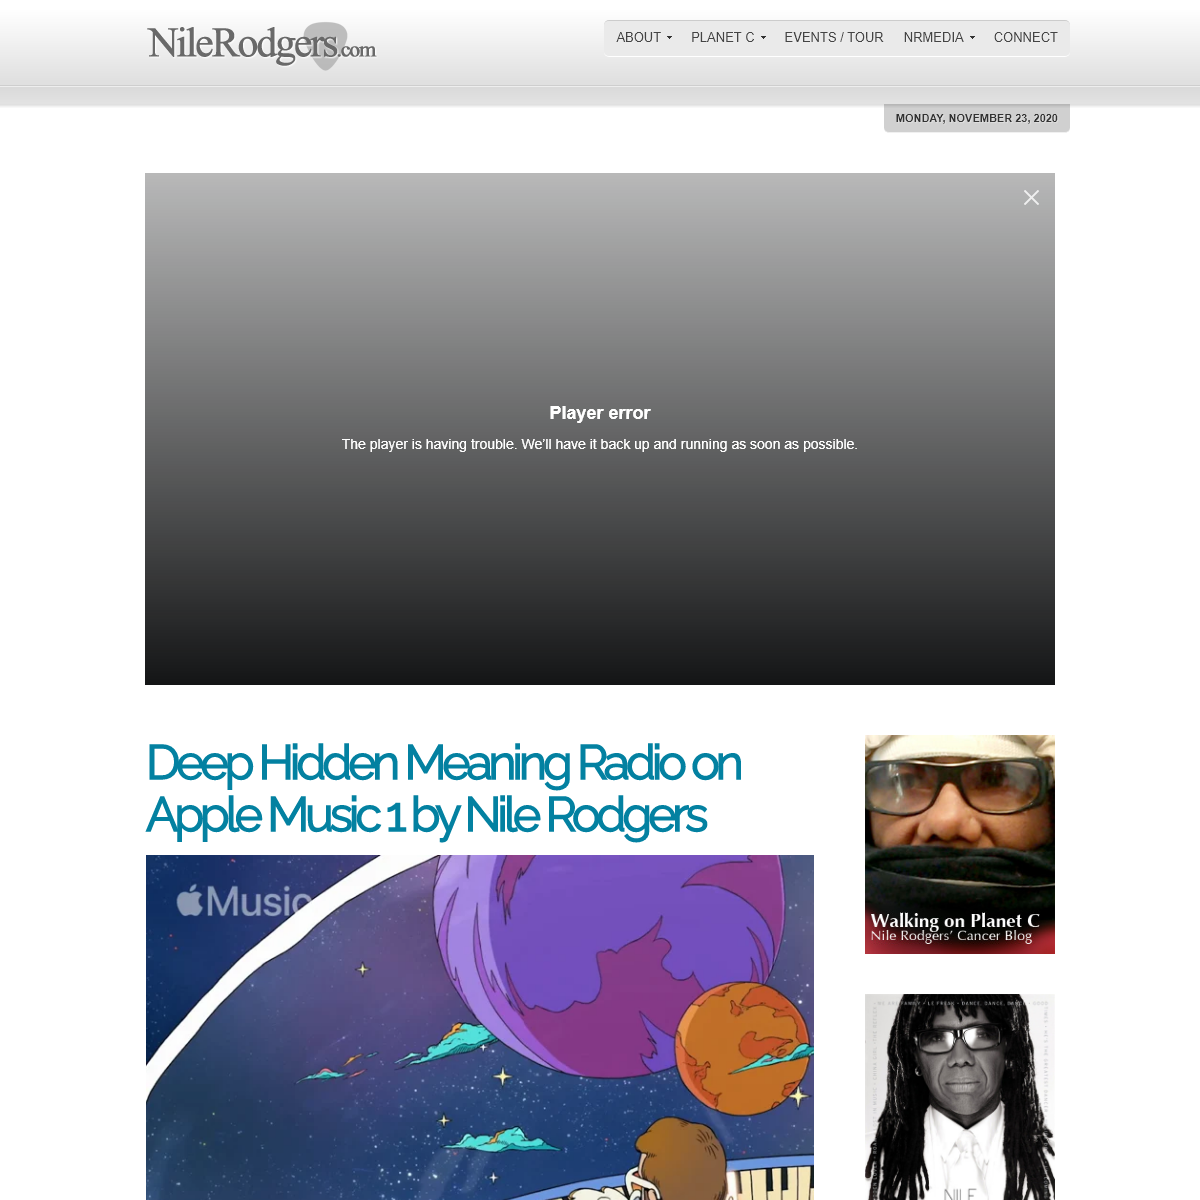 A complete backup of nilerodgers.com